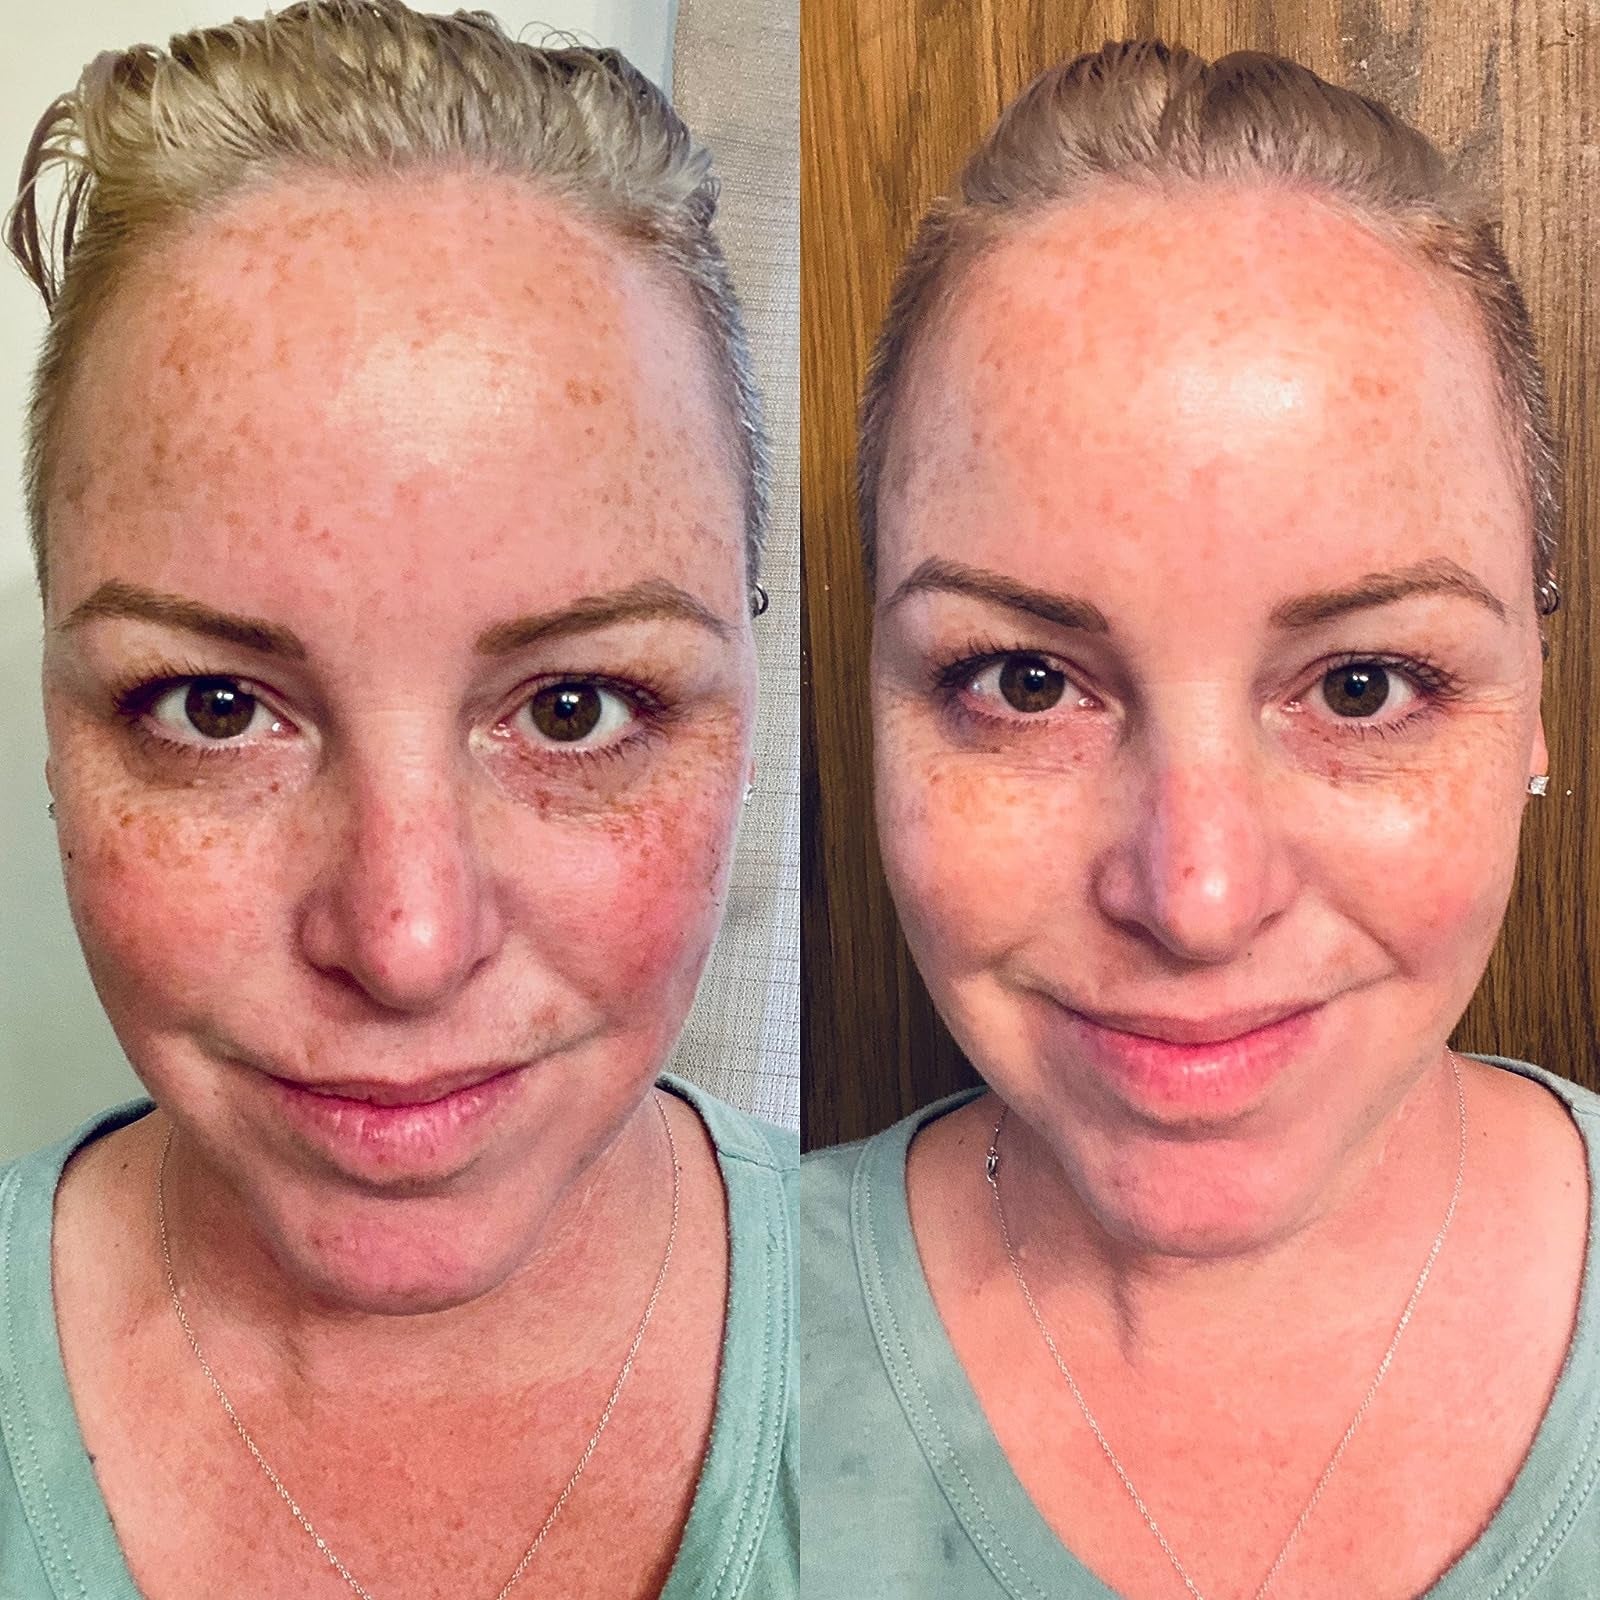 A reviewer's before and after photo with much smoother, lifted, and brightened skin after using the mask